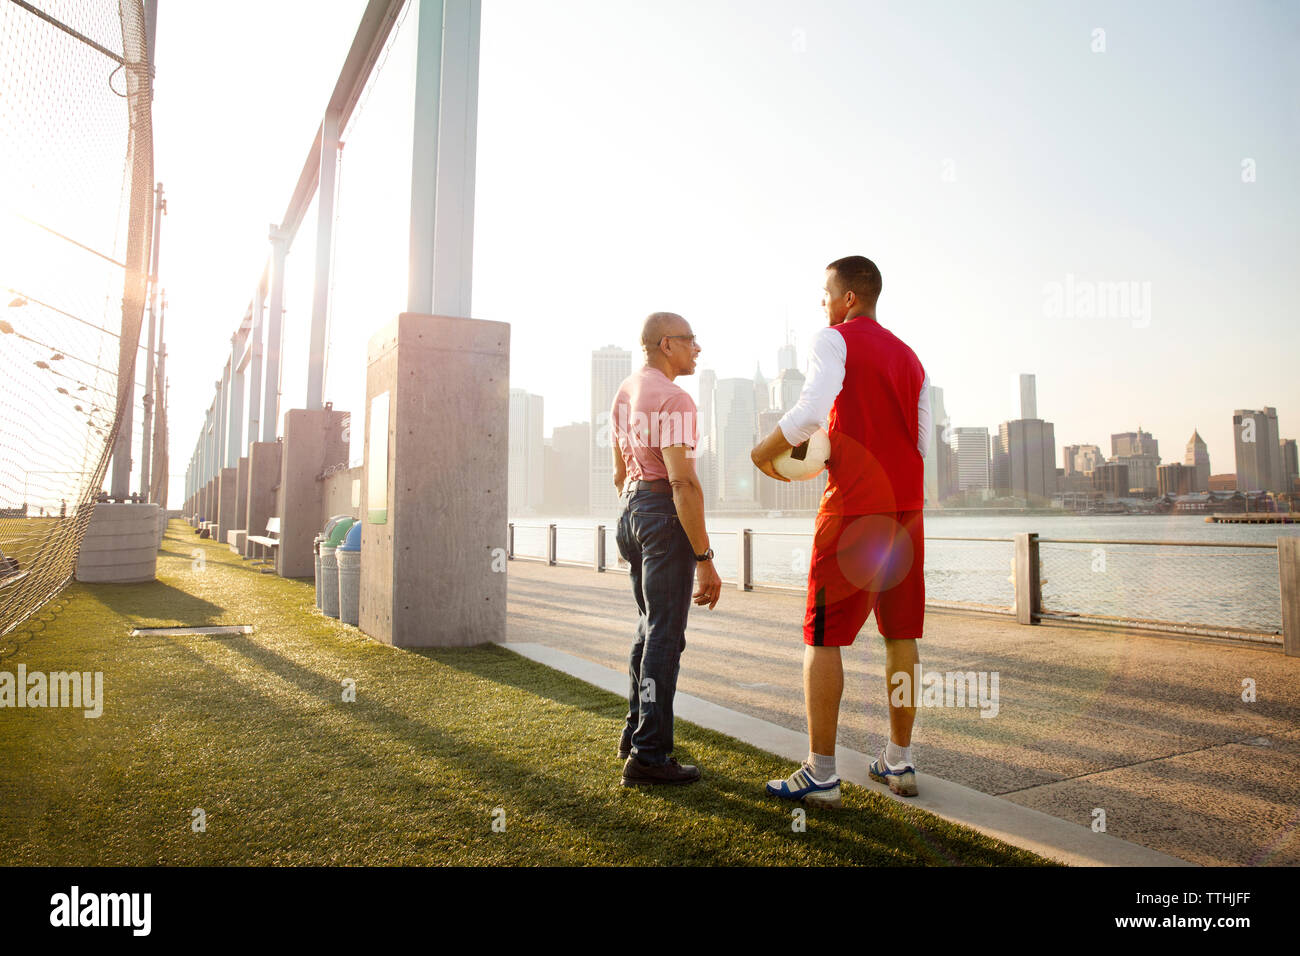 Man holding ball while talking to father at soccer field by East River in city Stock Photo